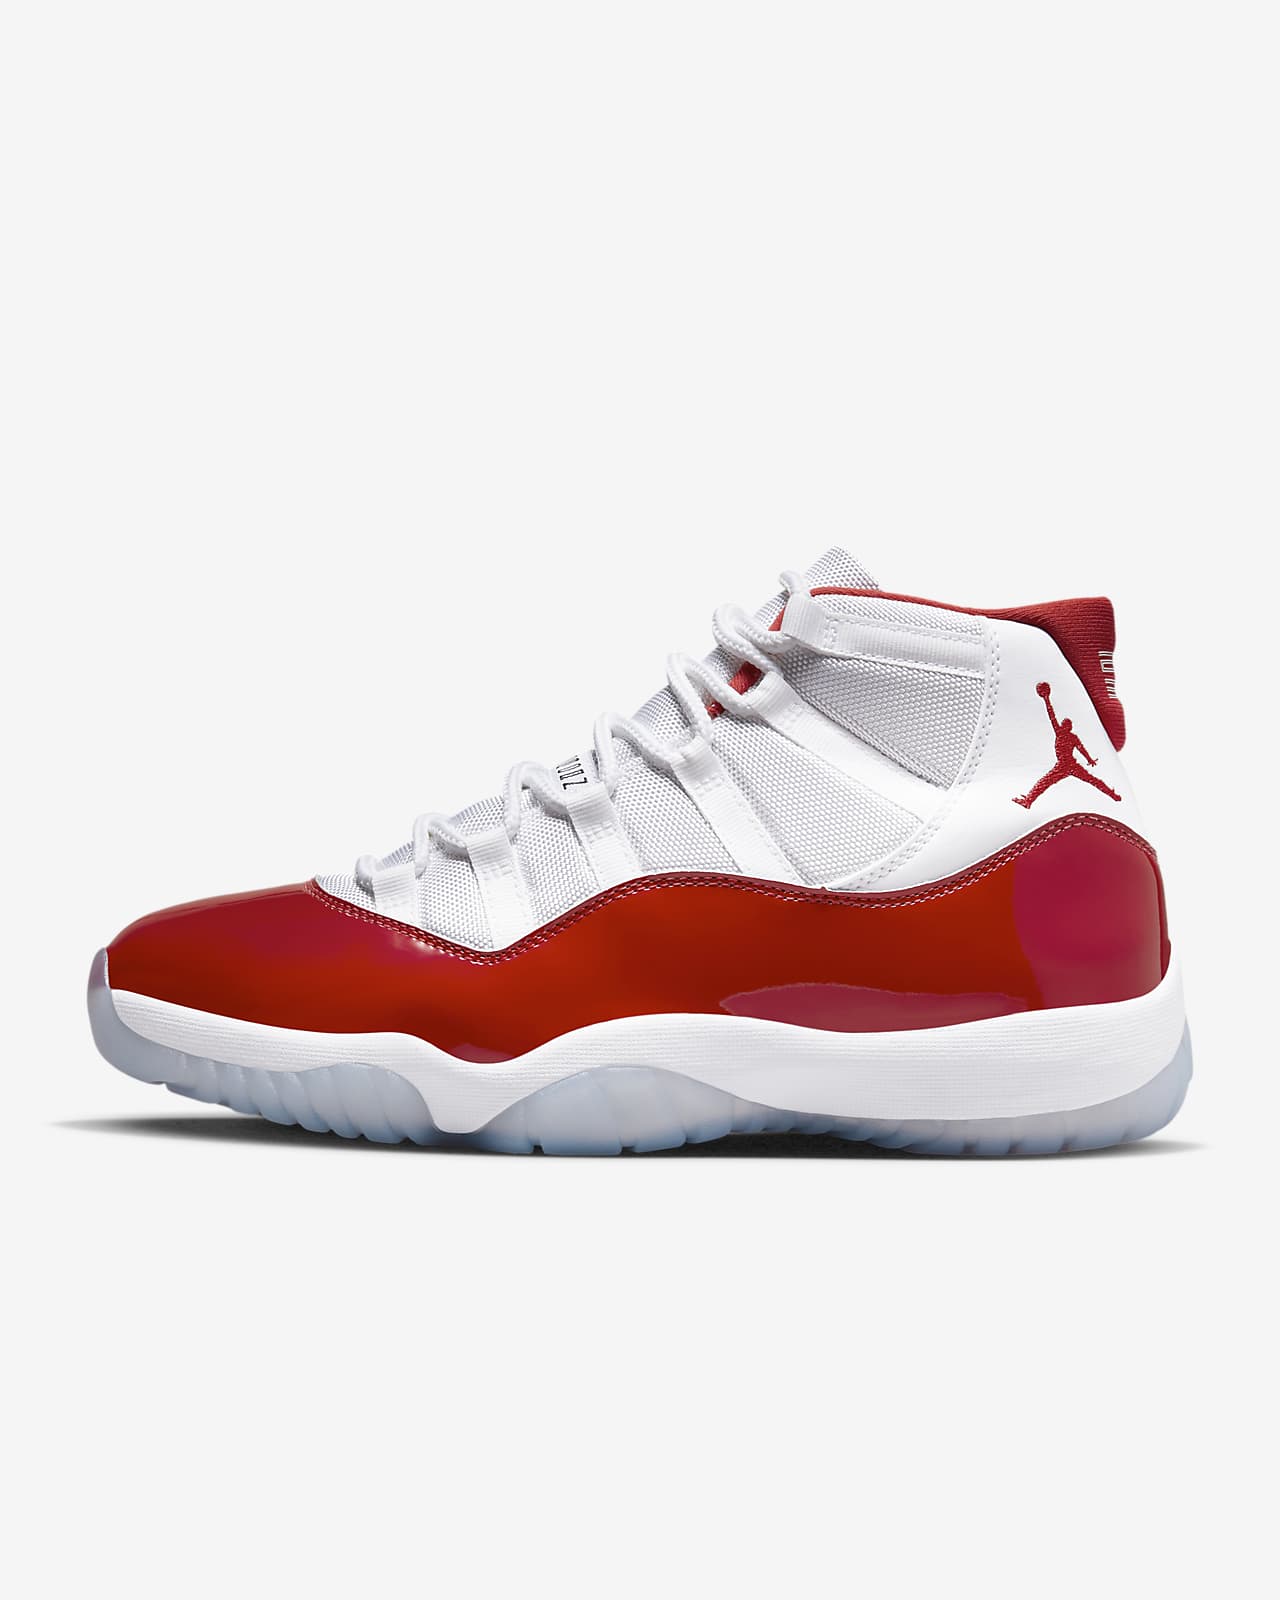 how much are the jordan 11 retro